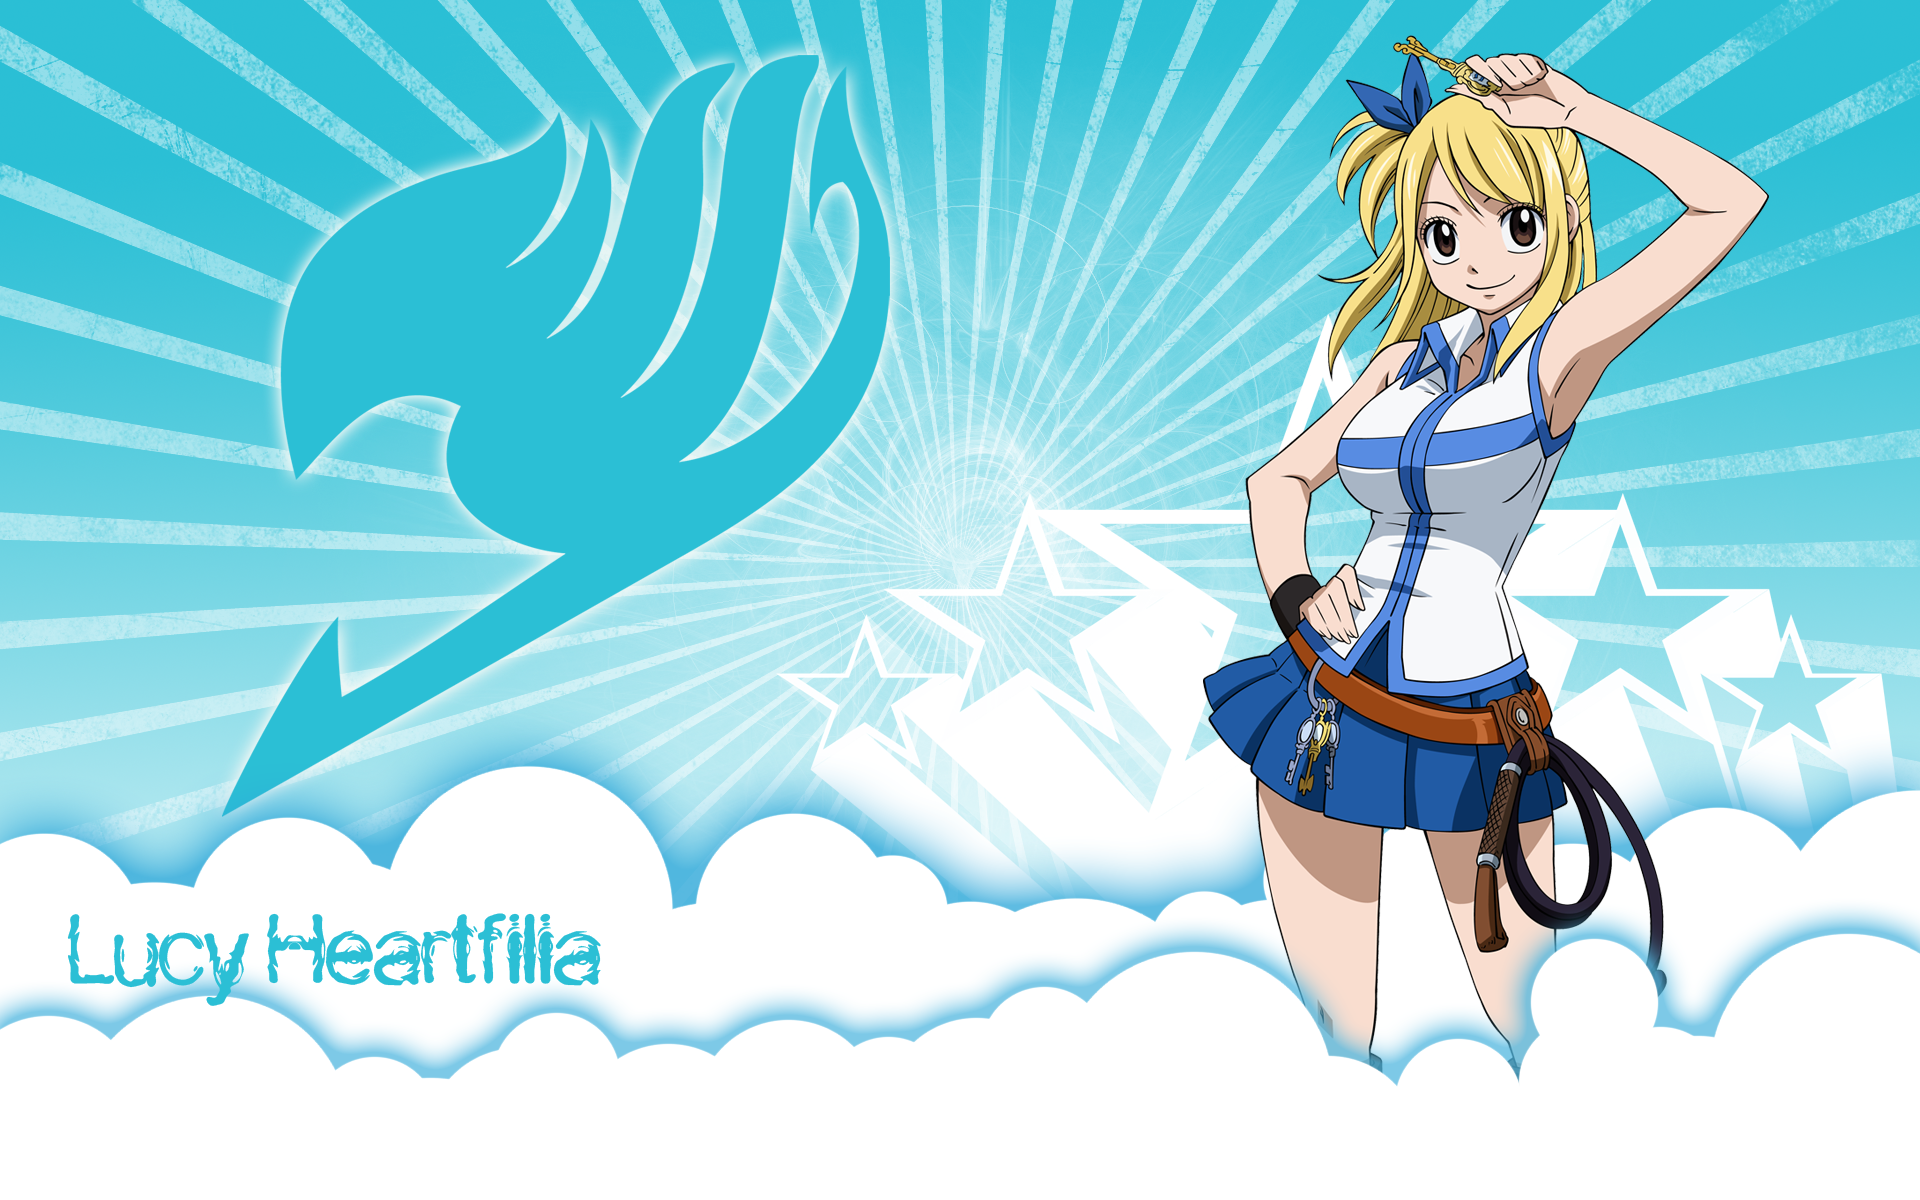 10. Lucy Heartfilia from Fairy Tail - wide 3